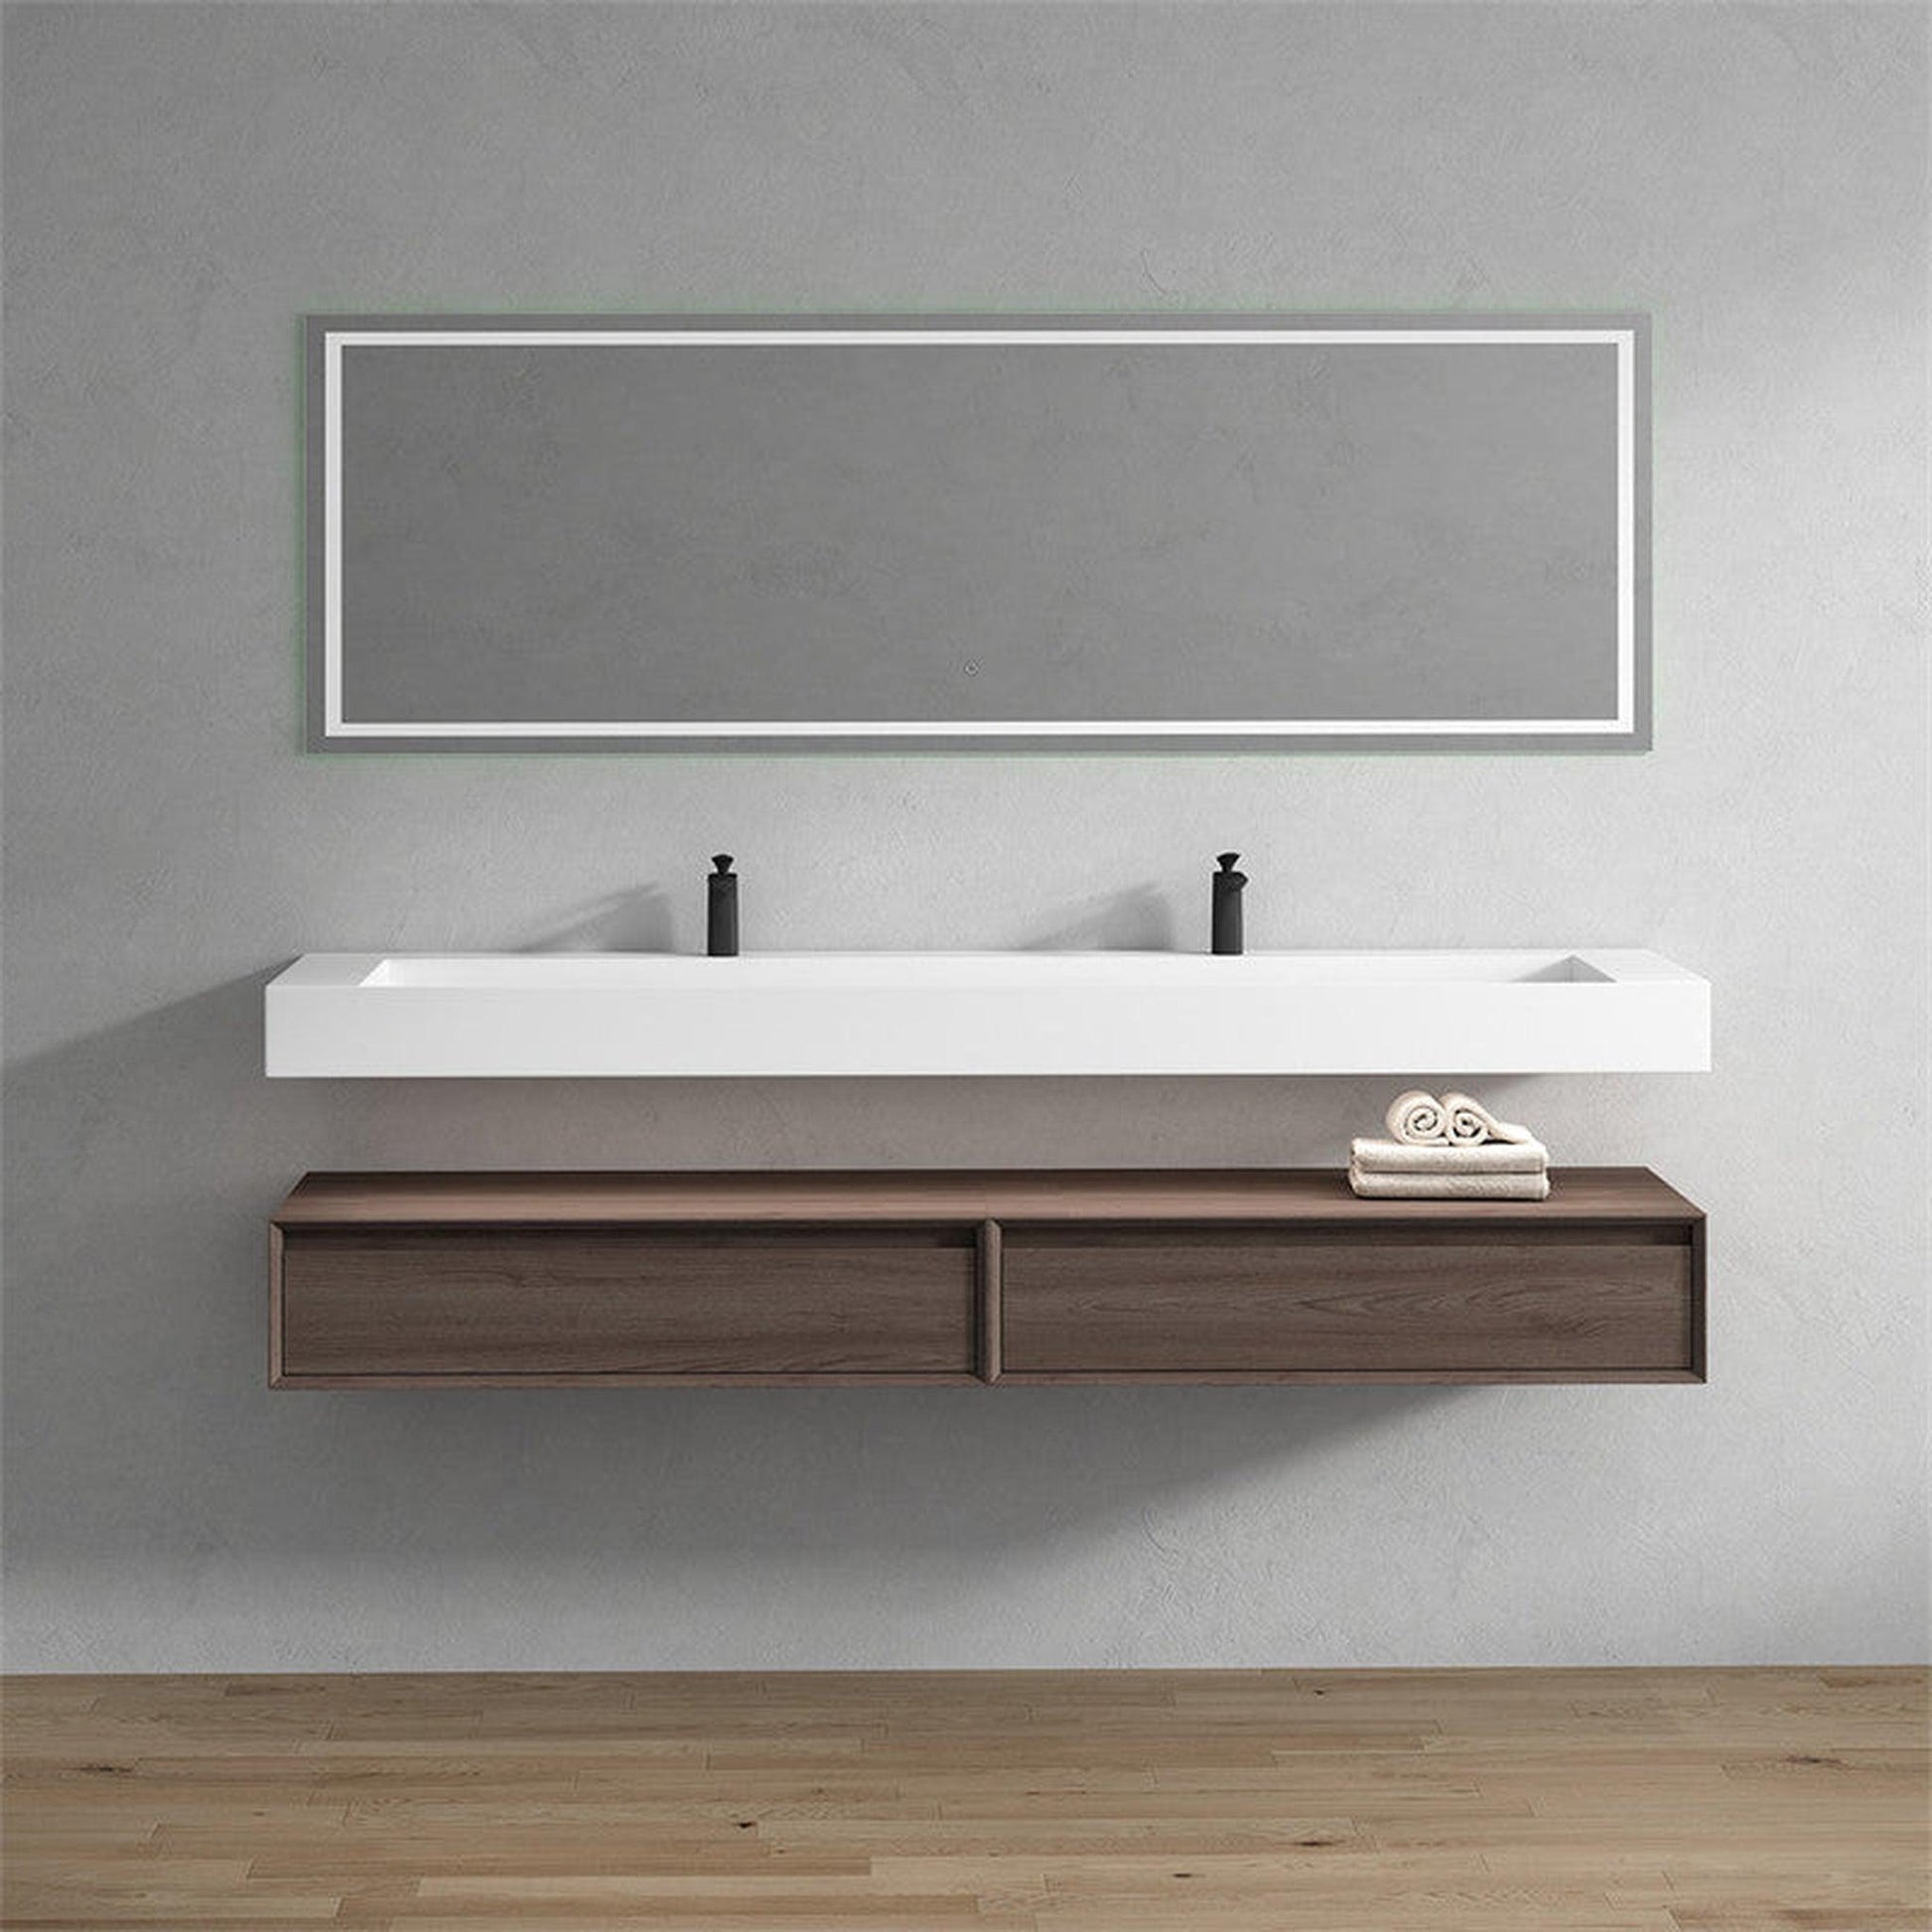 Moreno Bath ALYSA 84" Red Oak Floating Vanity With Double Faucet Holes and Reinforced White Acrylic Sink